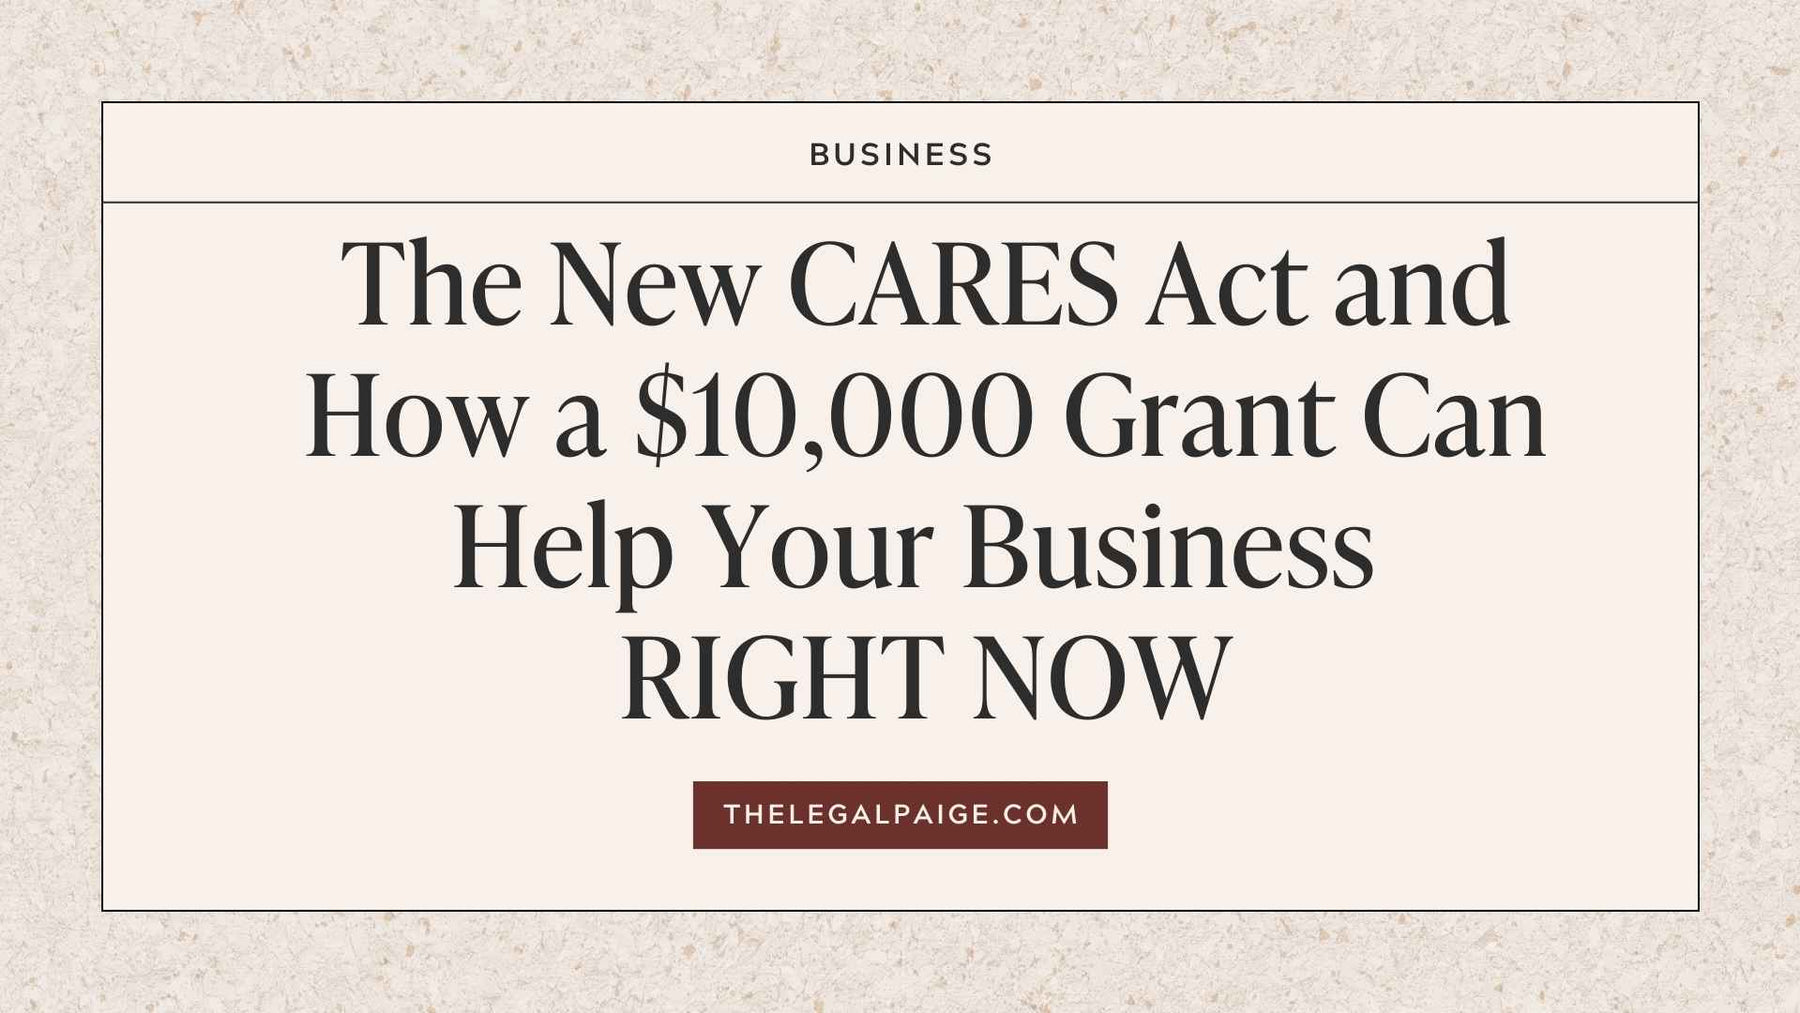 The New CARES Act and How a $10,000 Grant Can Help Your Business RIGHT NOW